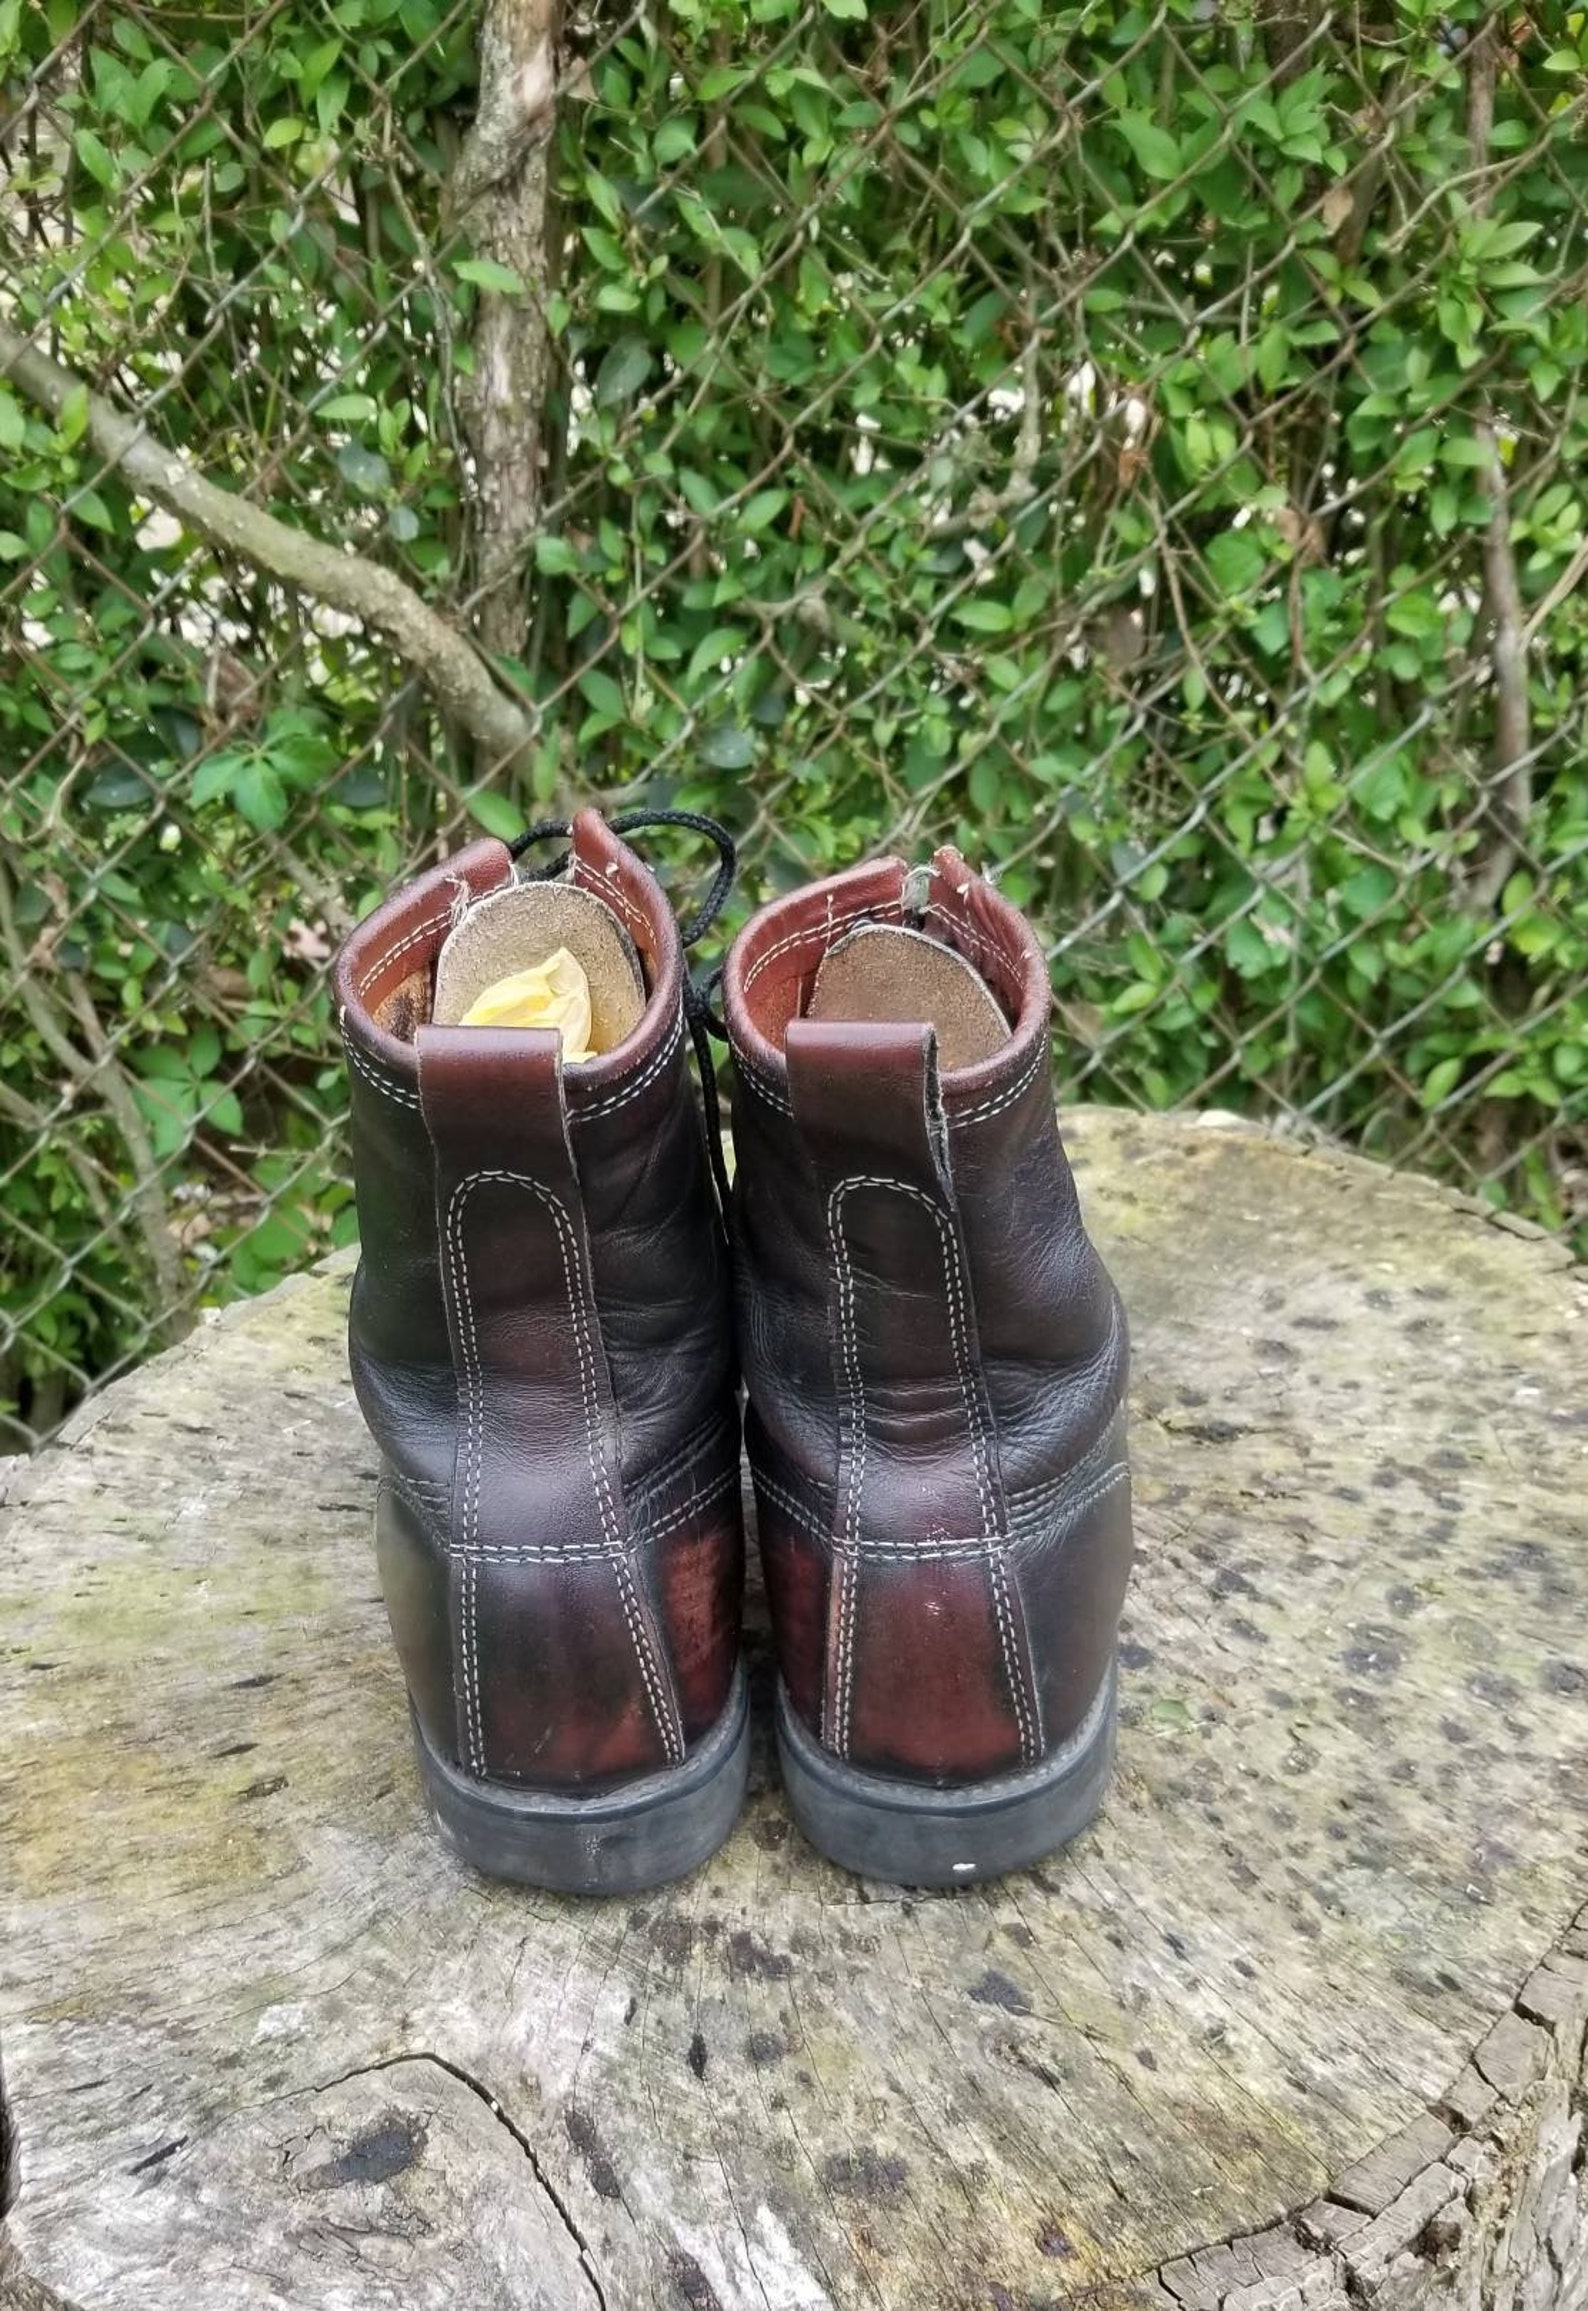 Texas Steer Made in USA Combat Boots Vintage Leather Barn | Etsy